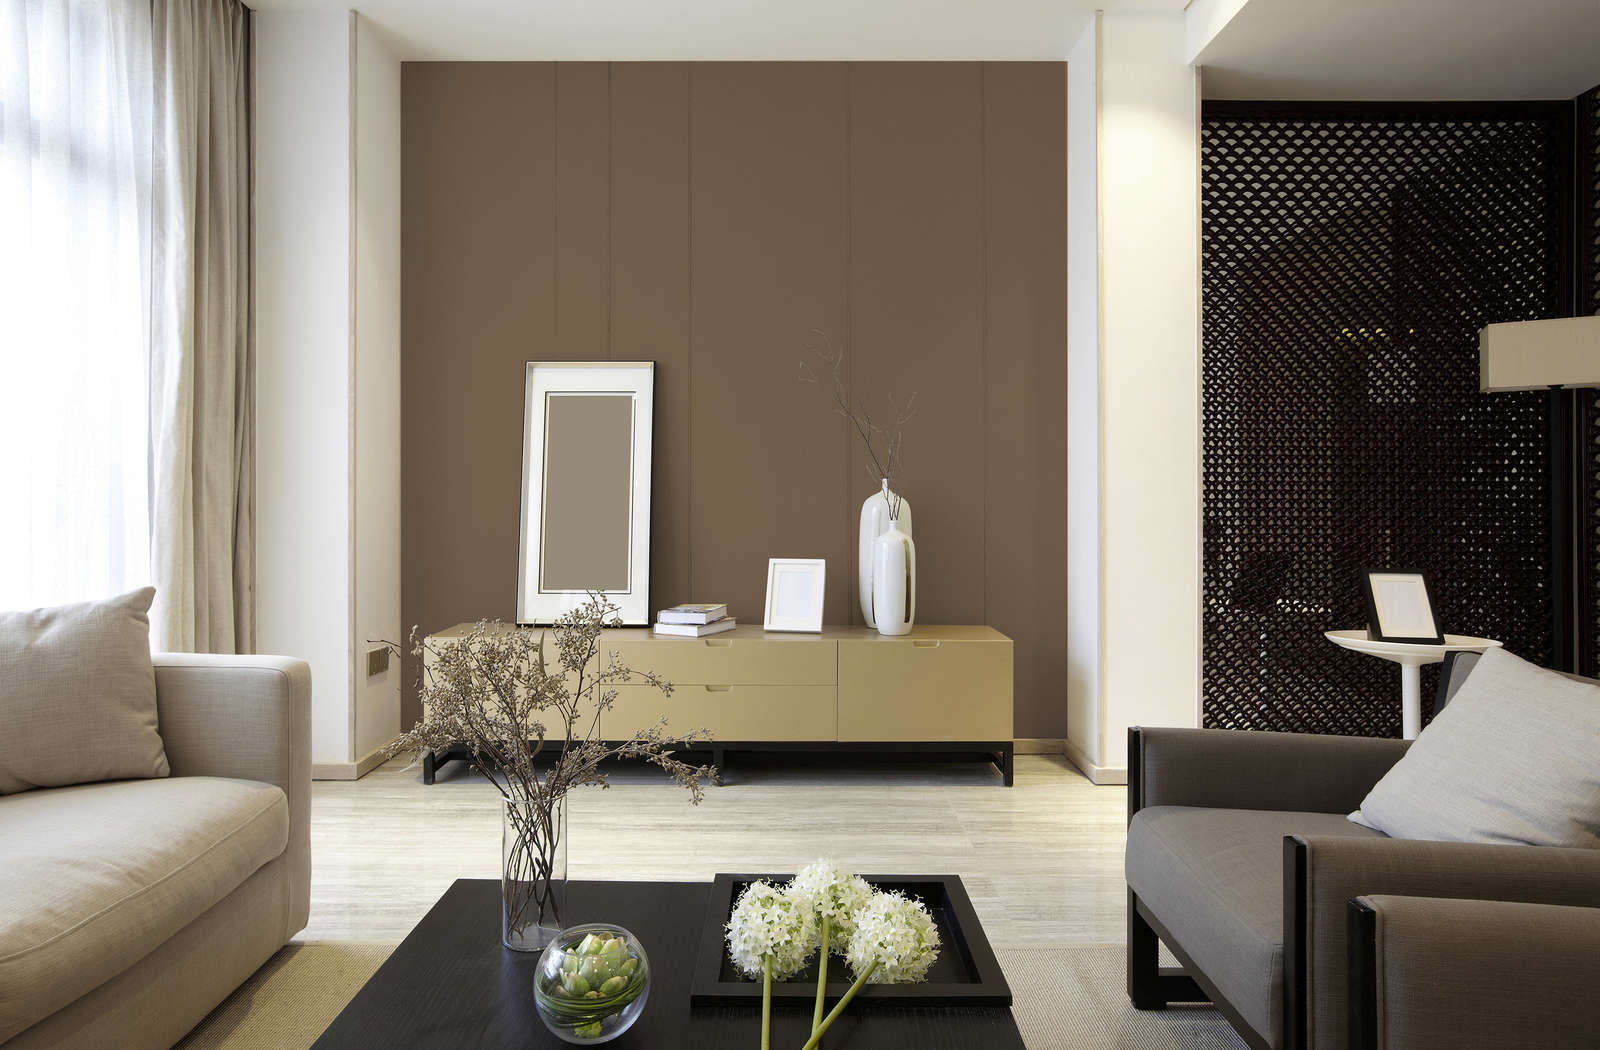             Premium Wall Paint Soothing Brown »Essential Earth« NW711 – 5 litre
        